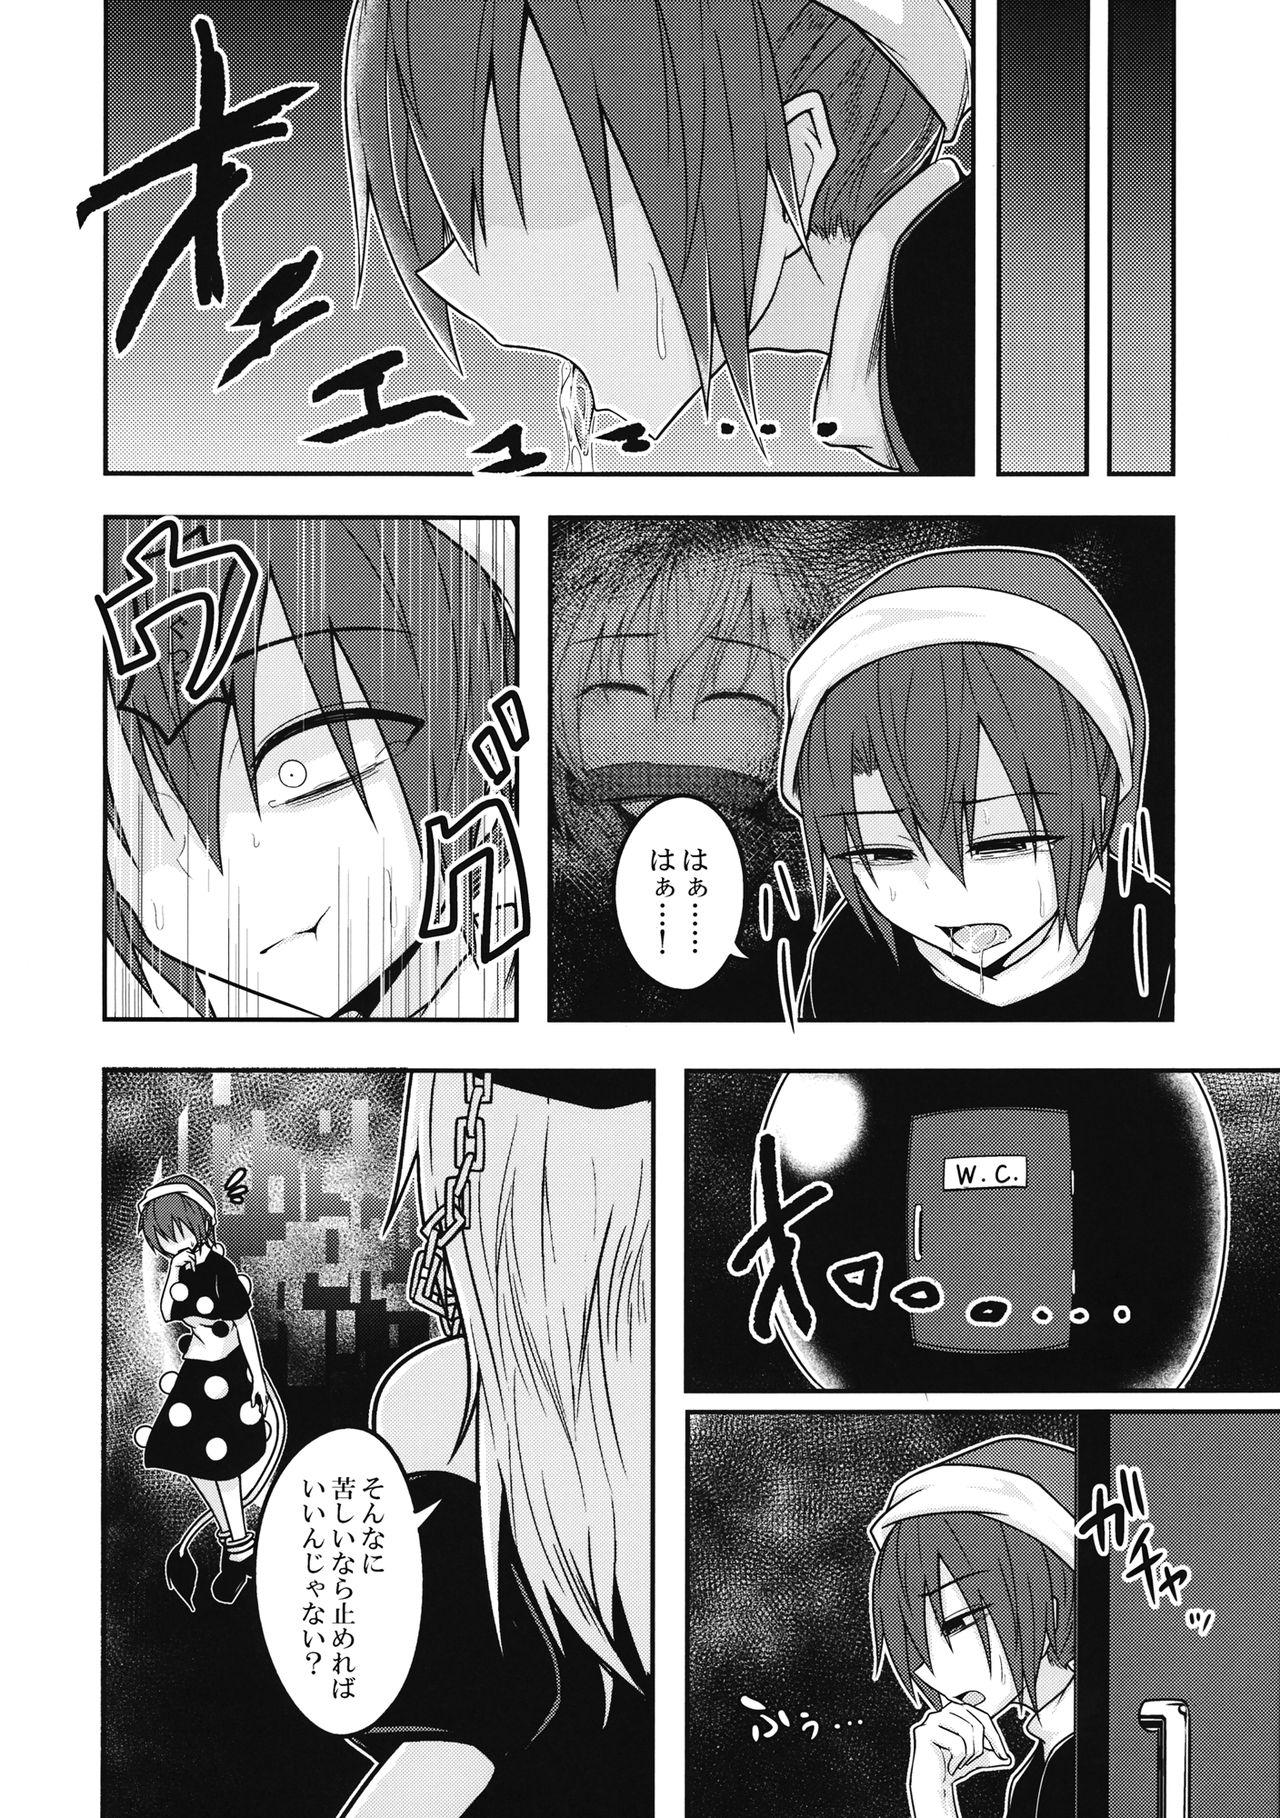 Snatch Yume no Torikago - Touhou project Publico - Page 13